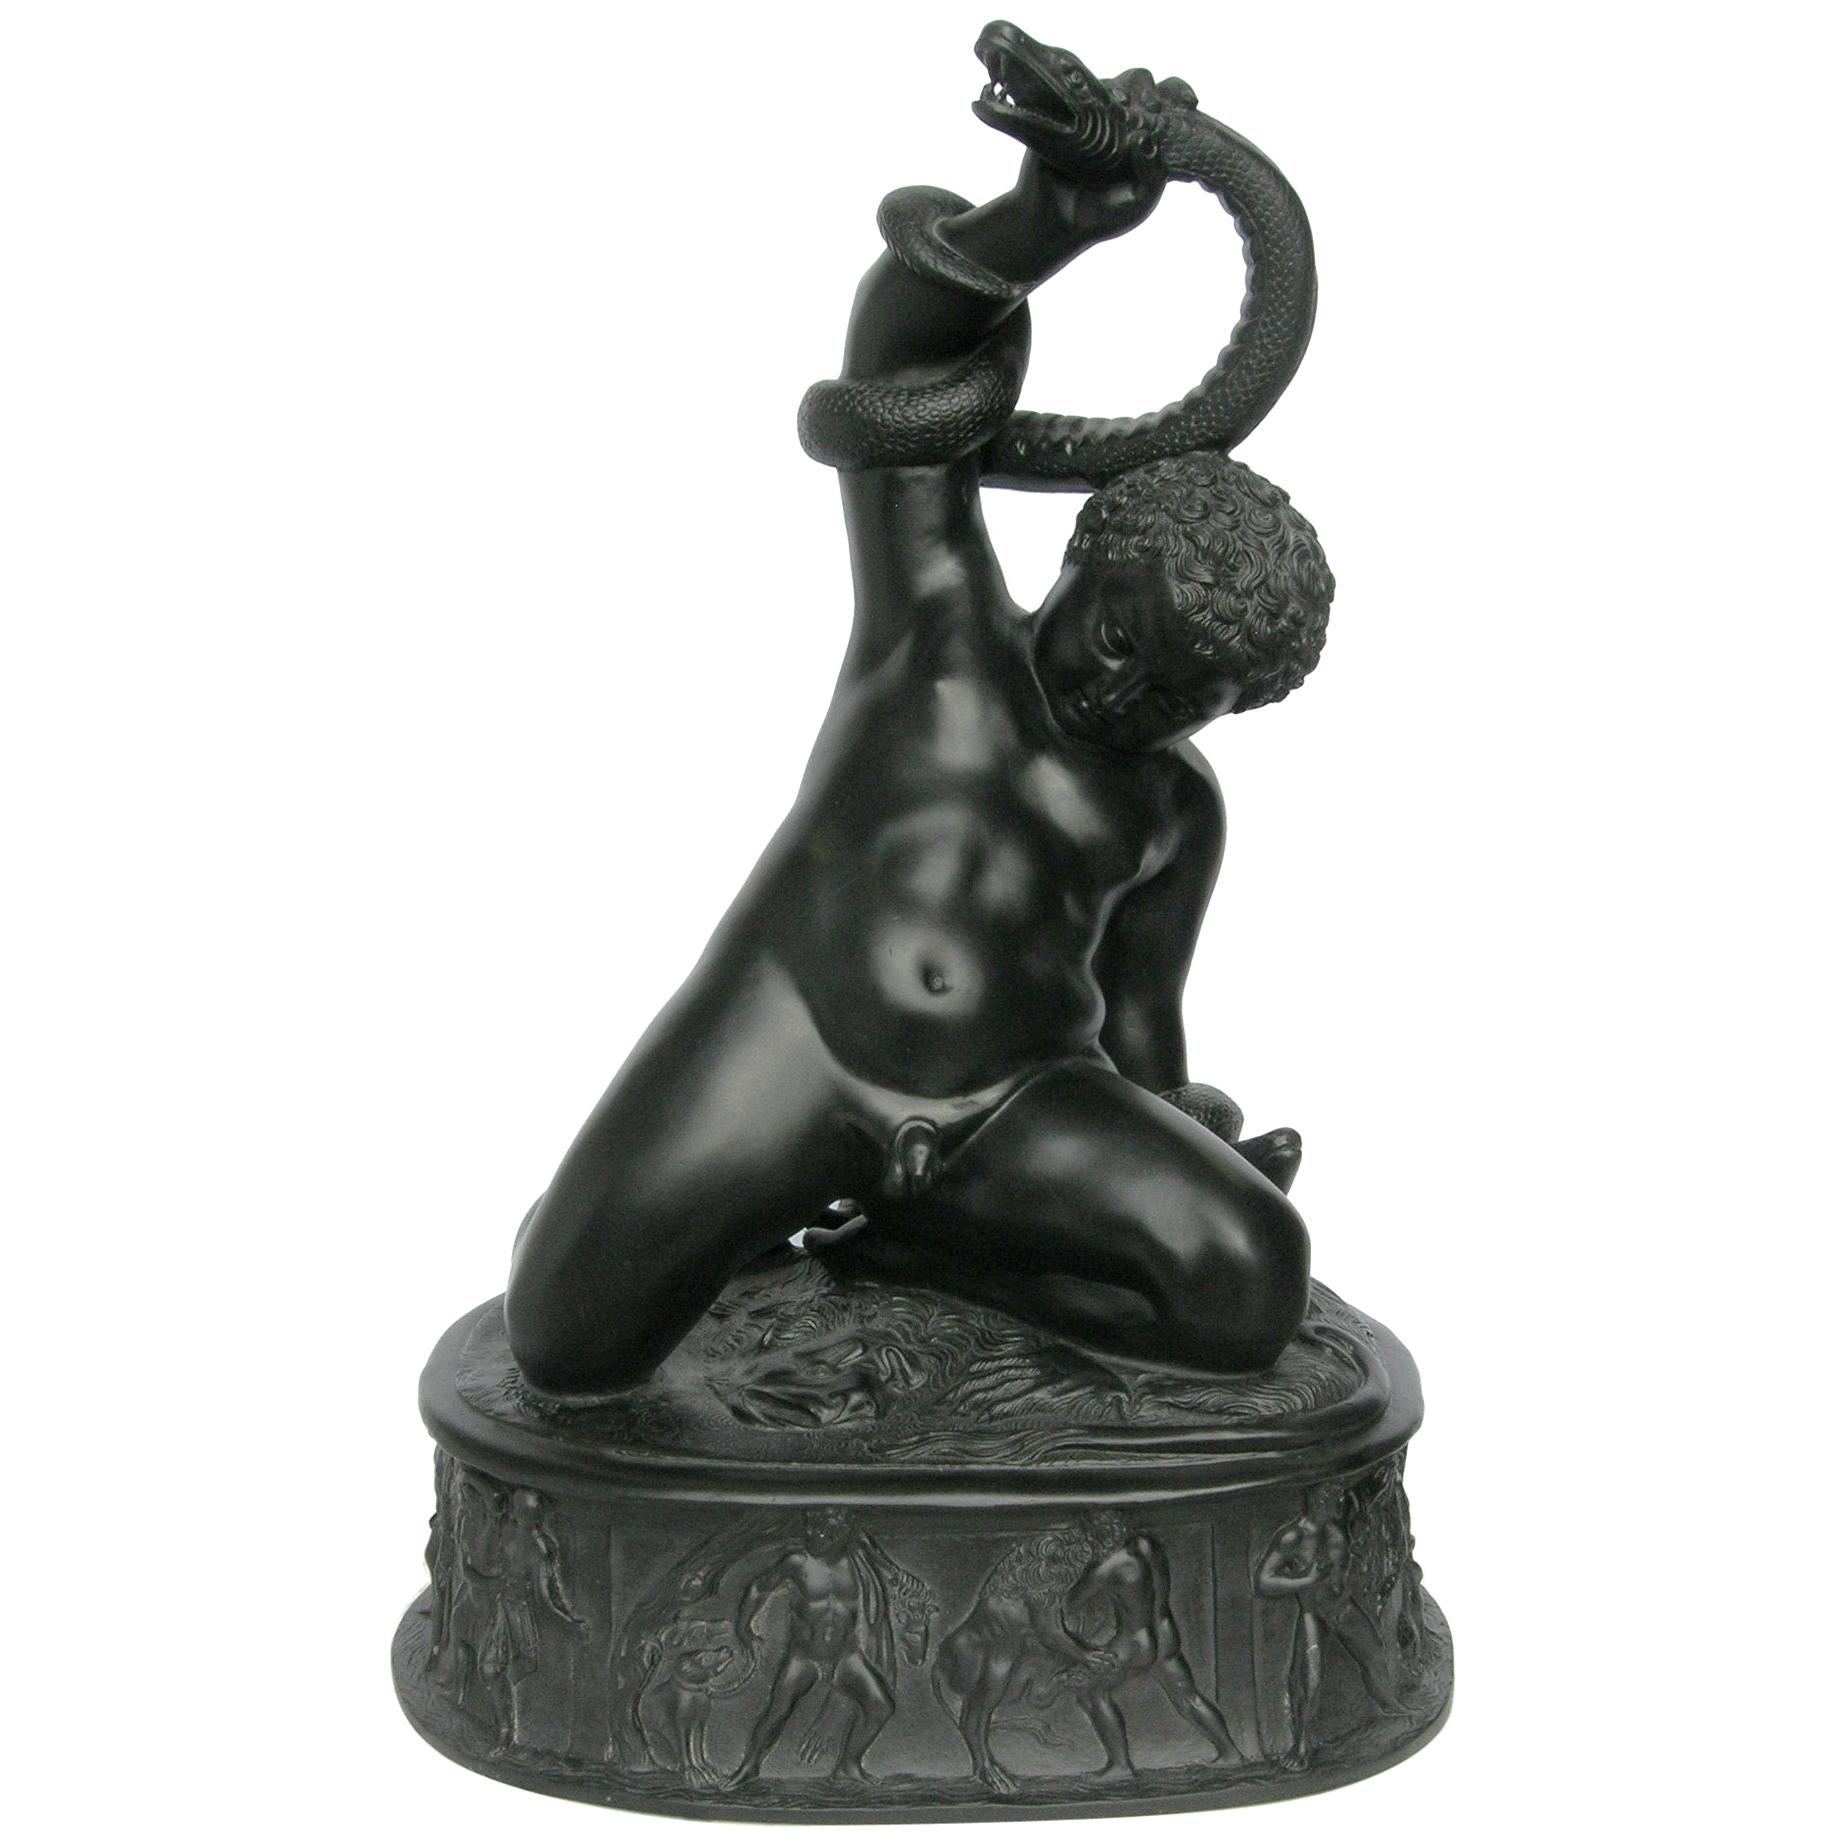 The Young Hercules, Basalt Black Marble Sculpture, 20th Century For Sale